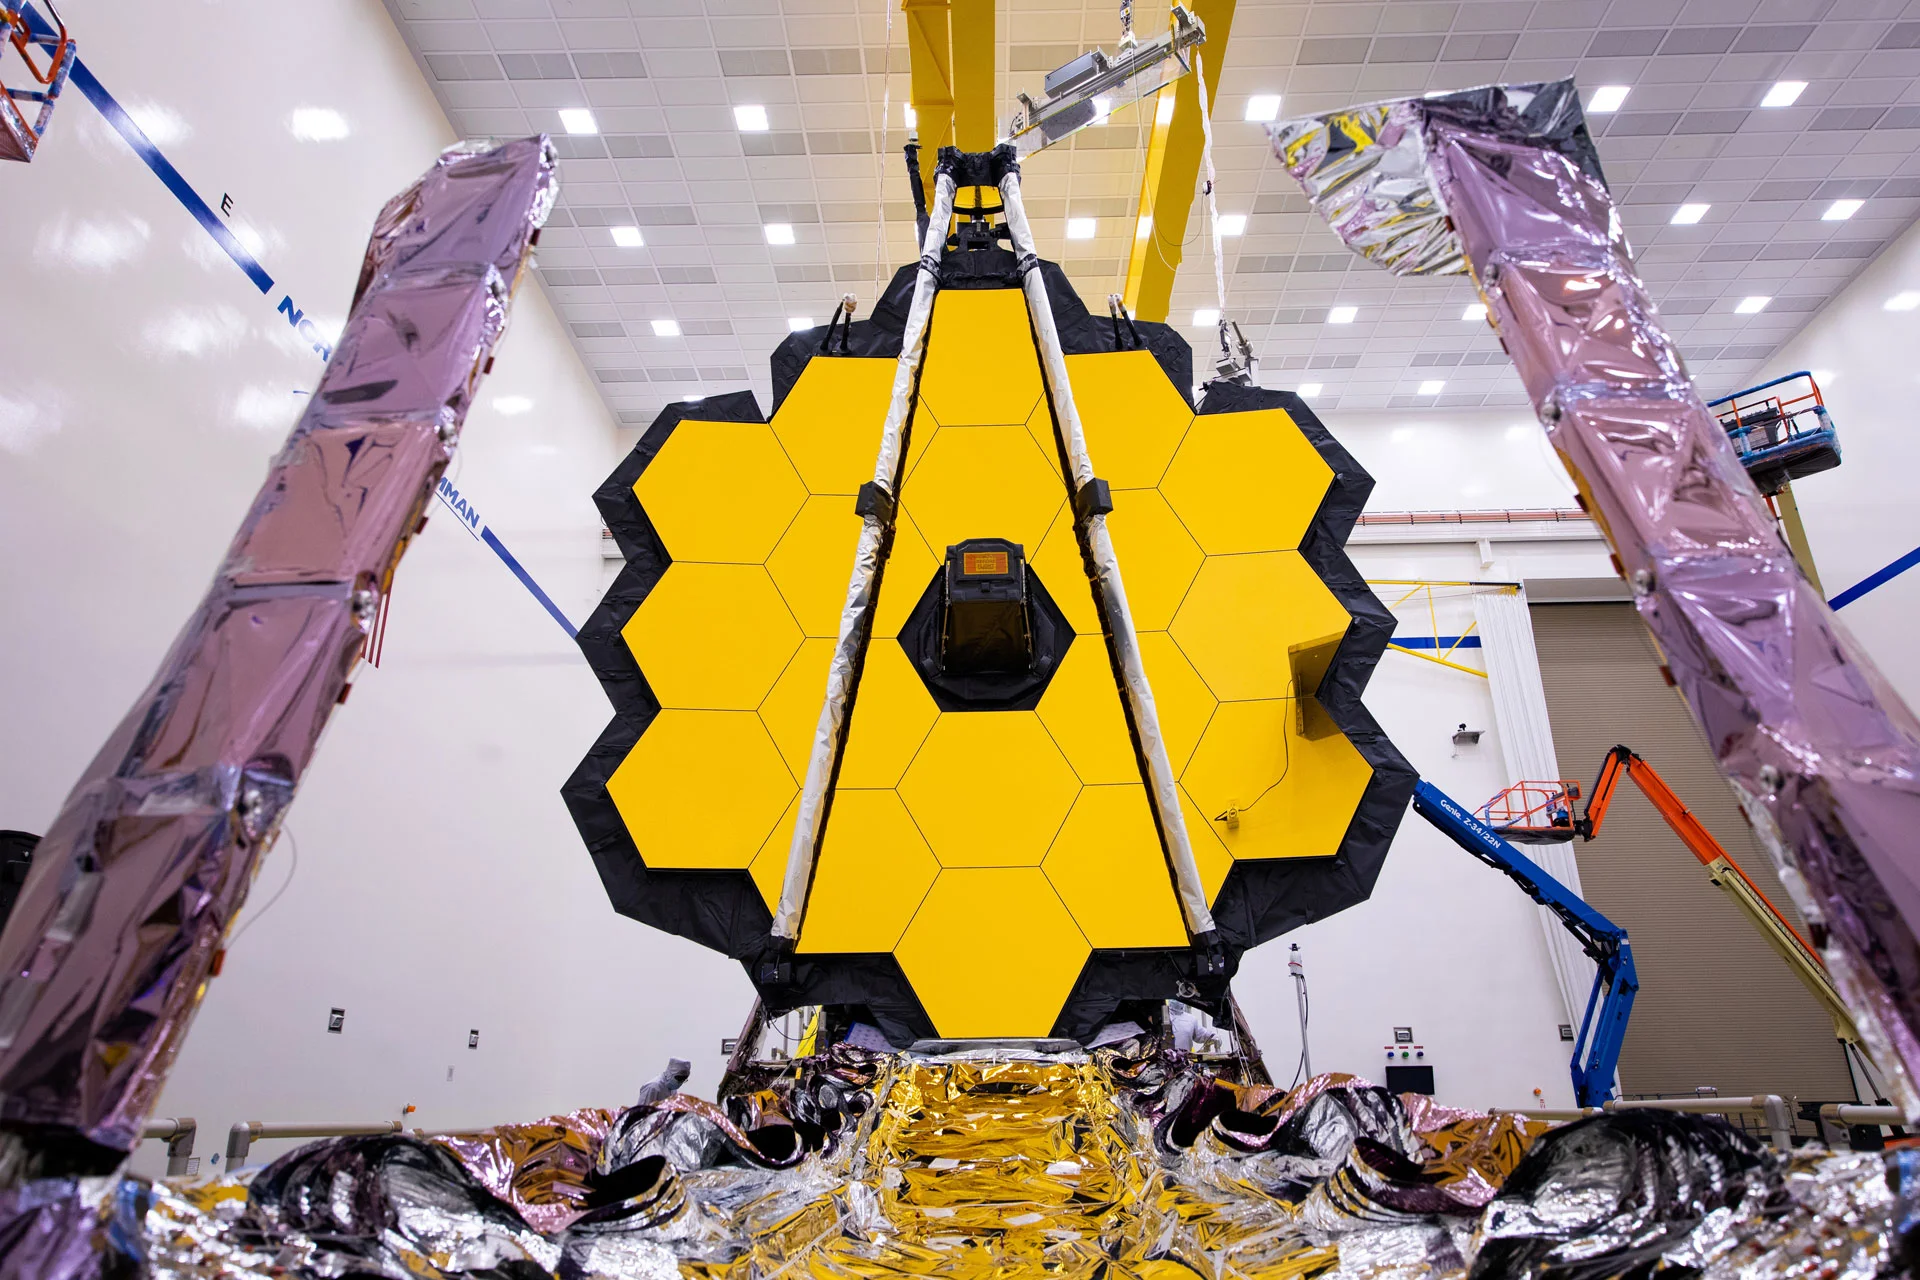 The James Webb telescope once again pleased with the image of a space object